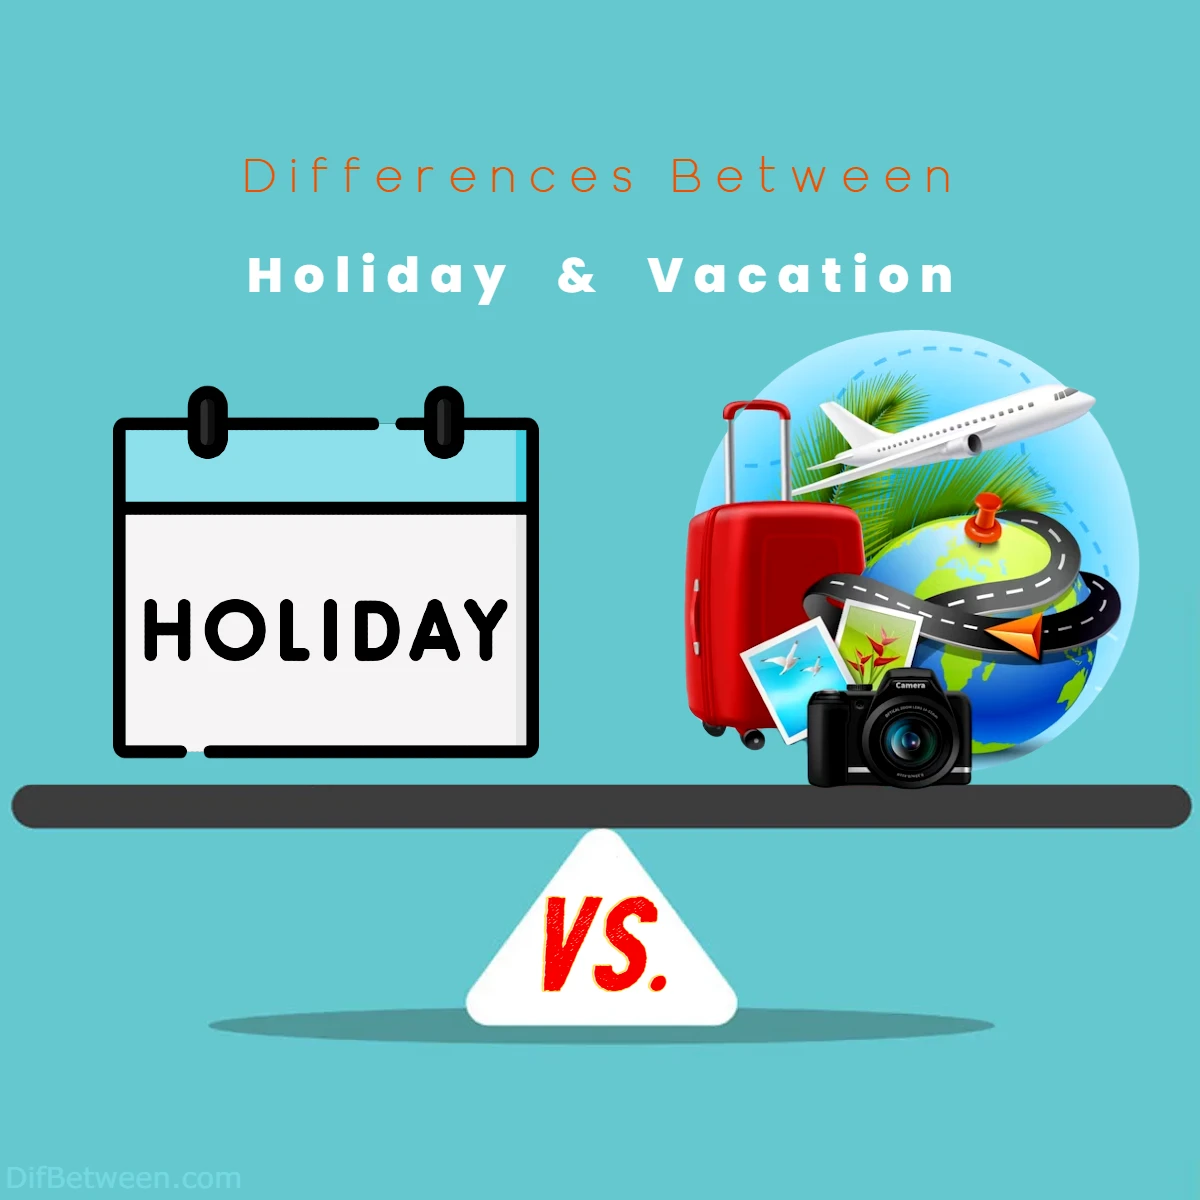 Differences Between Holiday vs Vacation